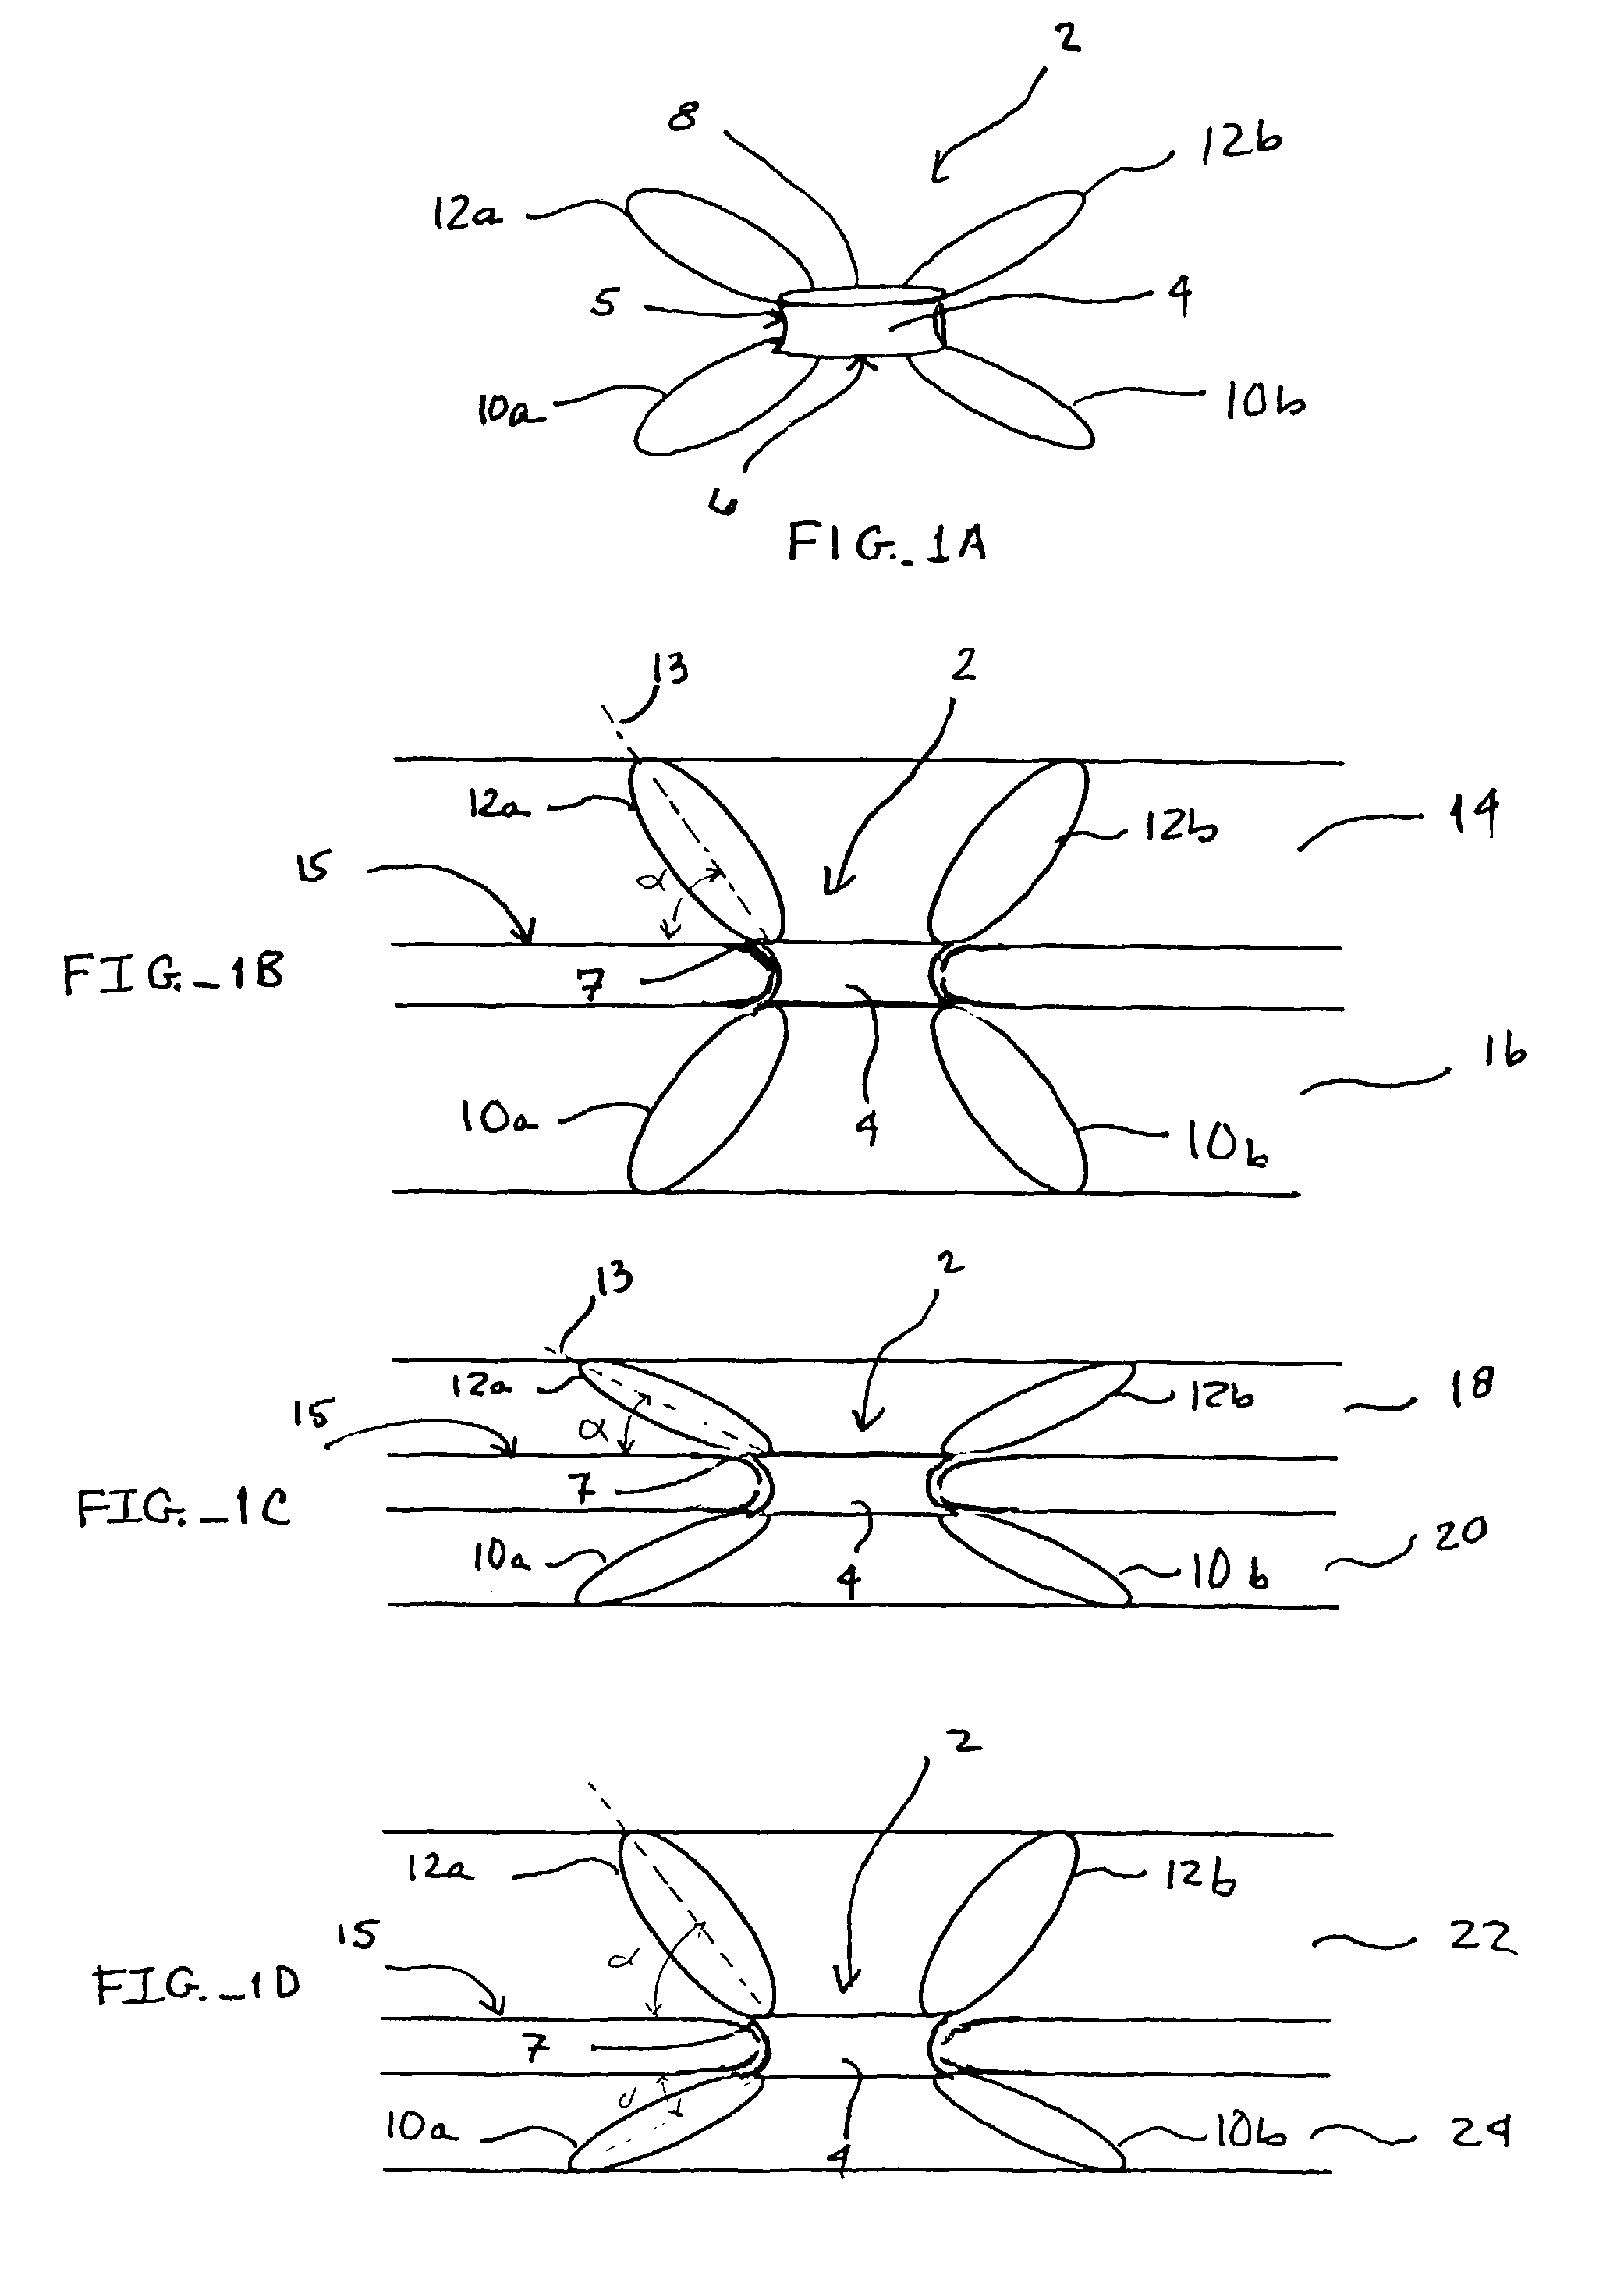 Devices and methods for interconnecting vessels